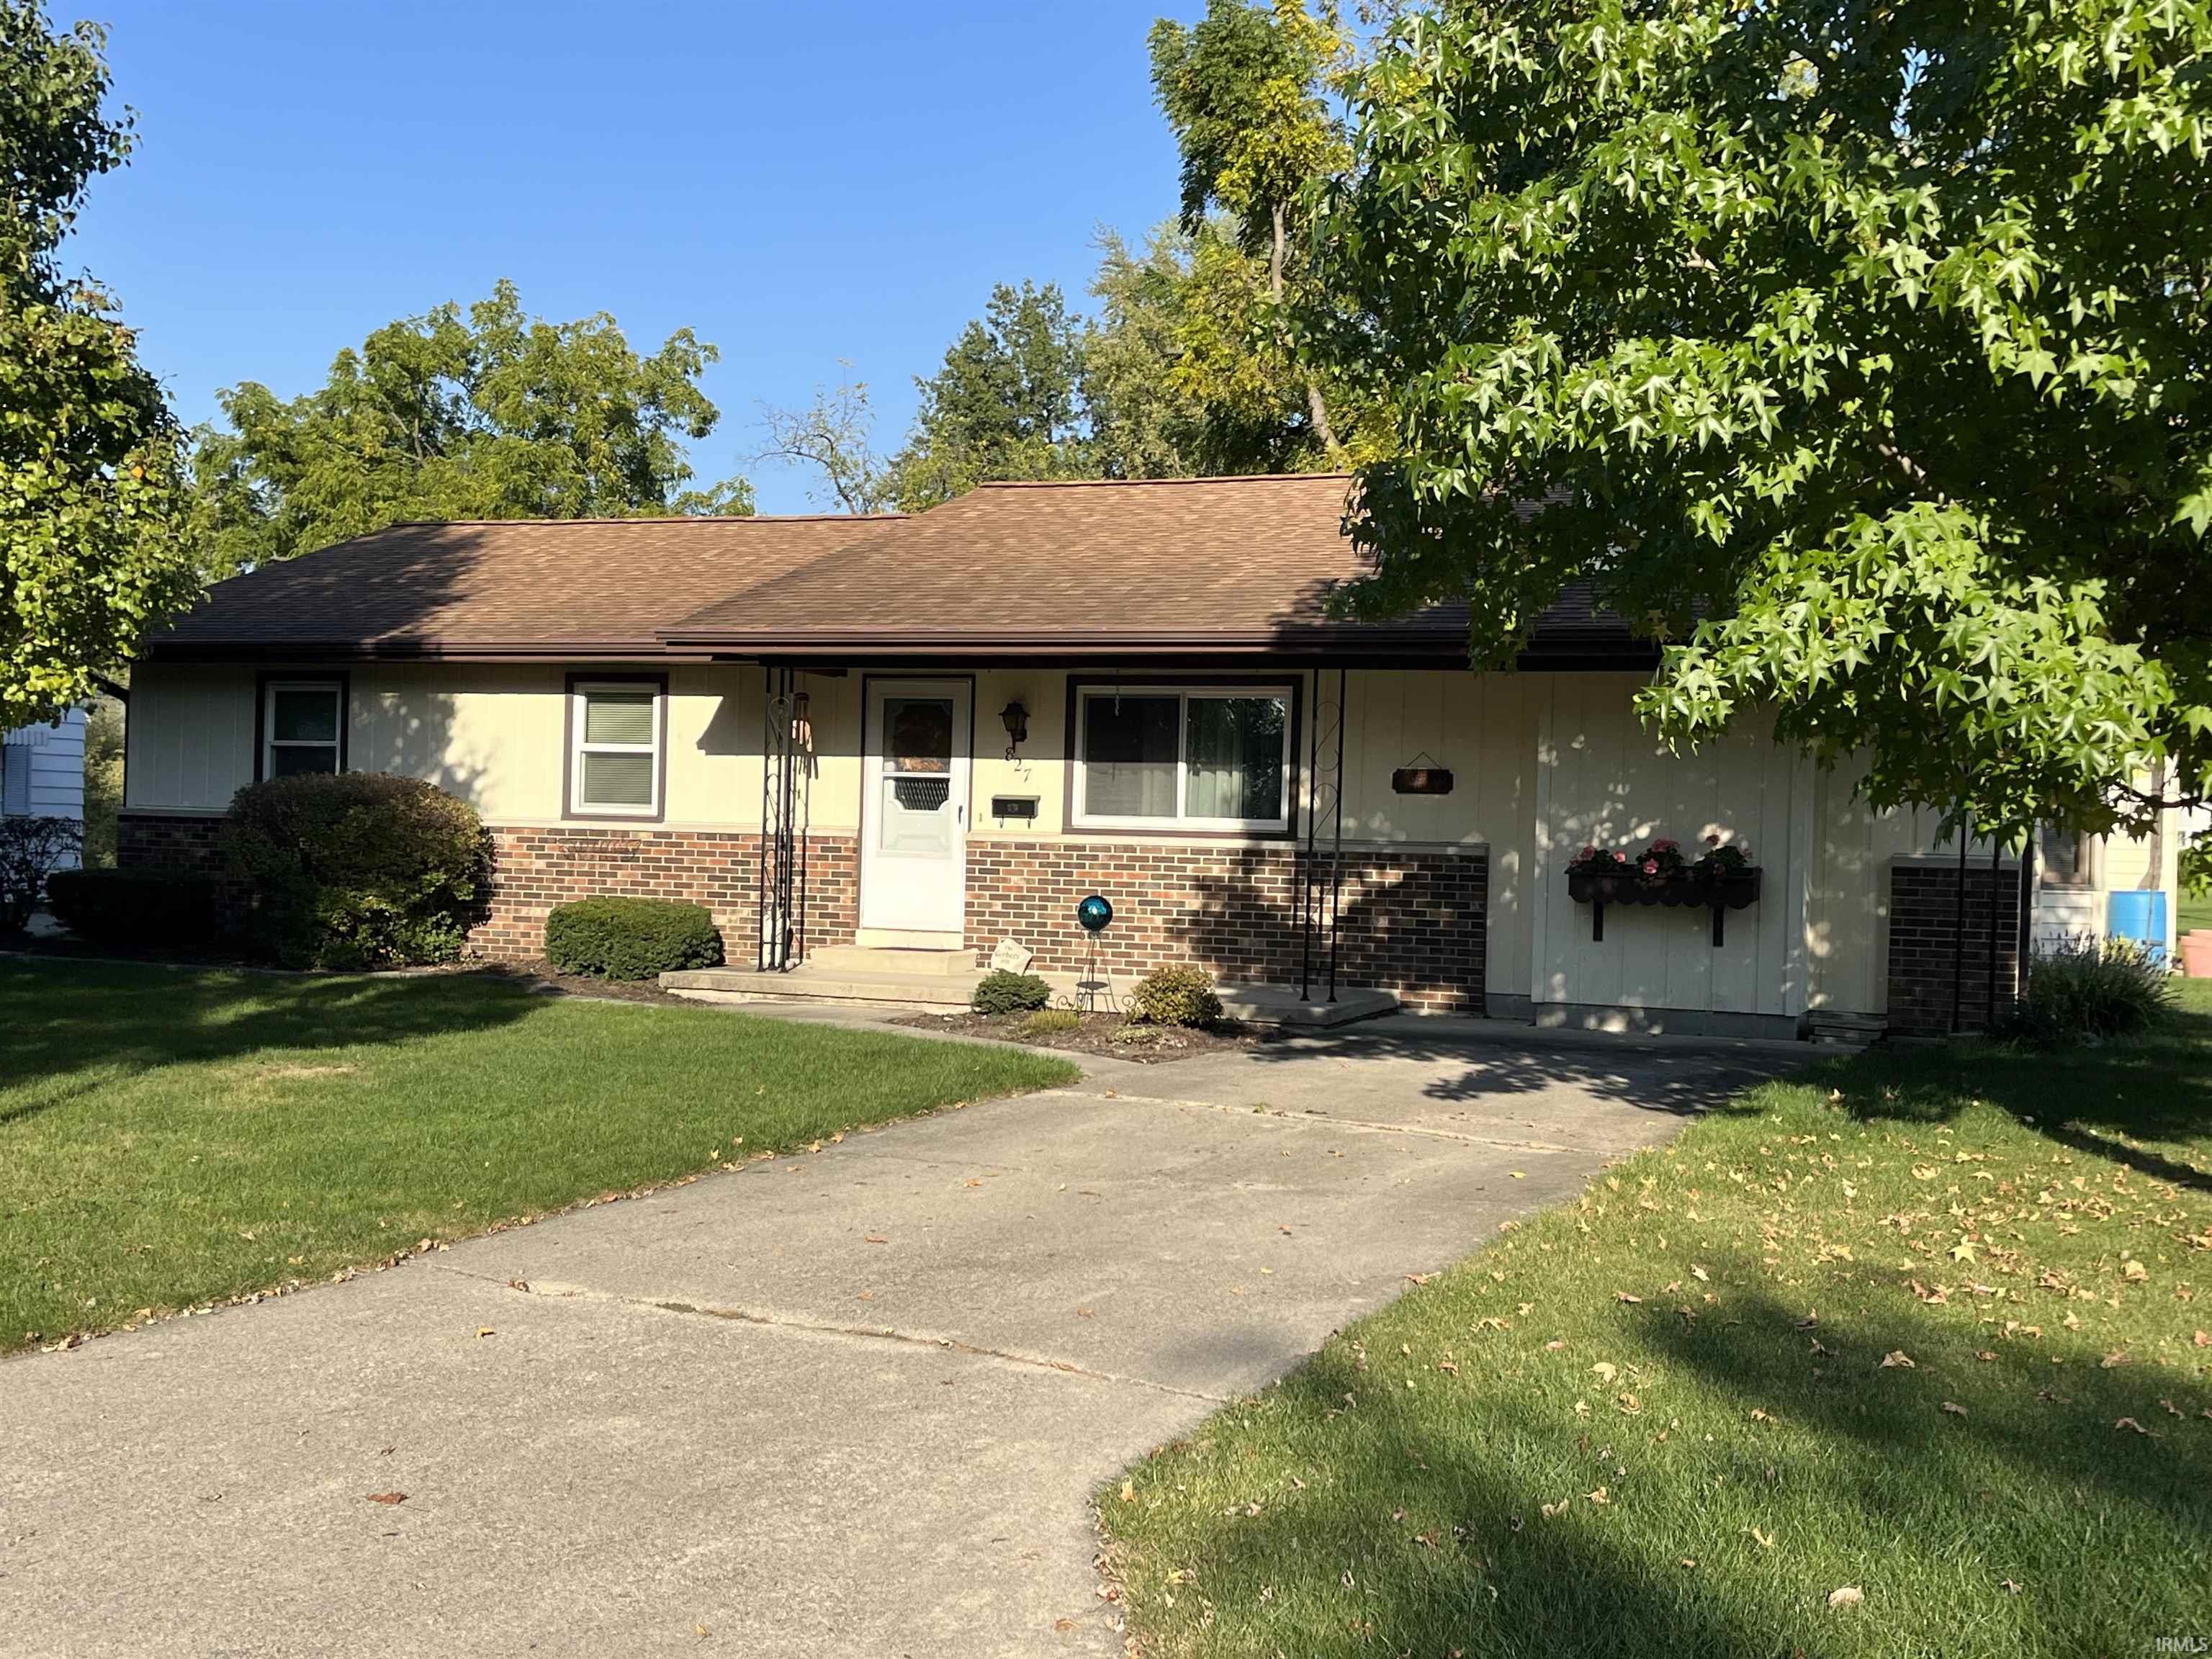 Don't miss this opportunity to own this well kept ranch on a double lot! Lots of yard space, 3 bedroom/possible 4, wood burning fireplace in the large family room, with 1 full bath. Large attached Garage. Move in ready. Possession at closing!!! A MUST SEE HOME!!